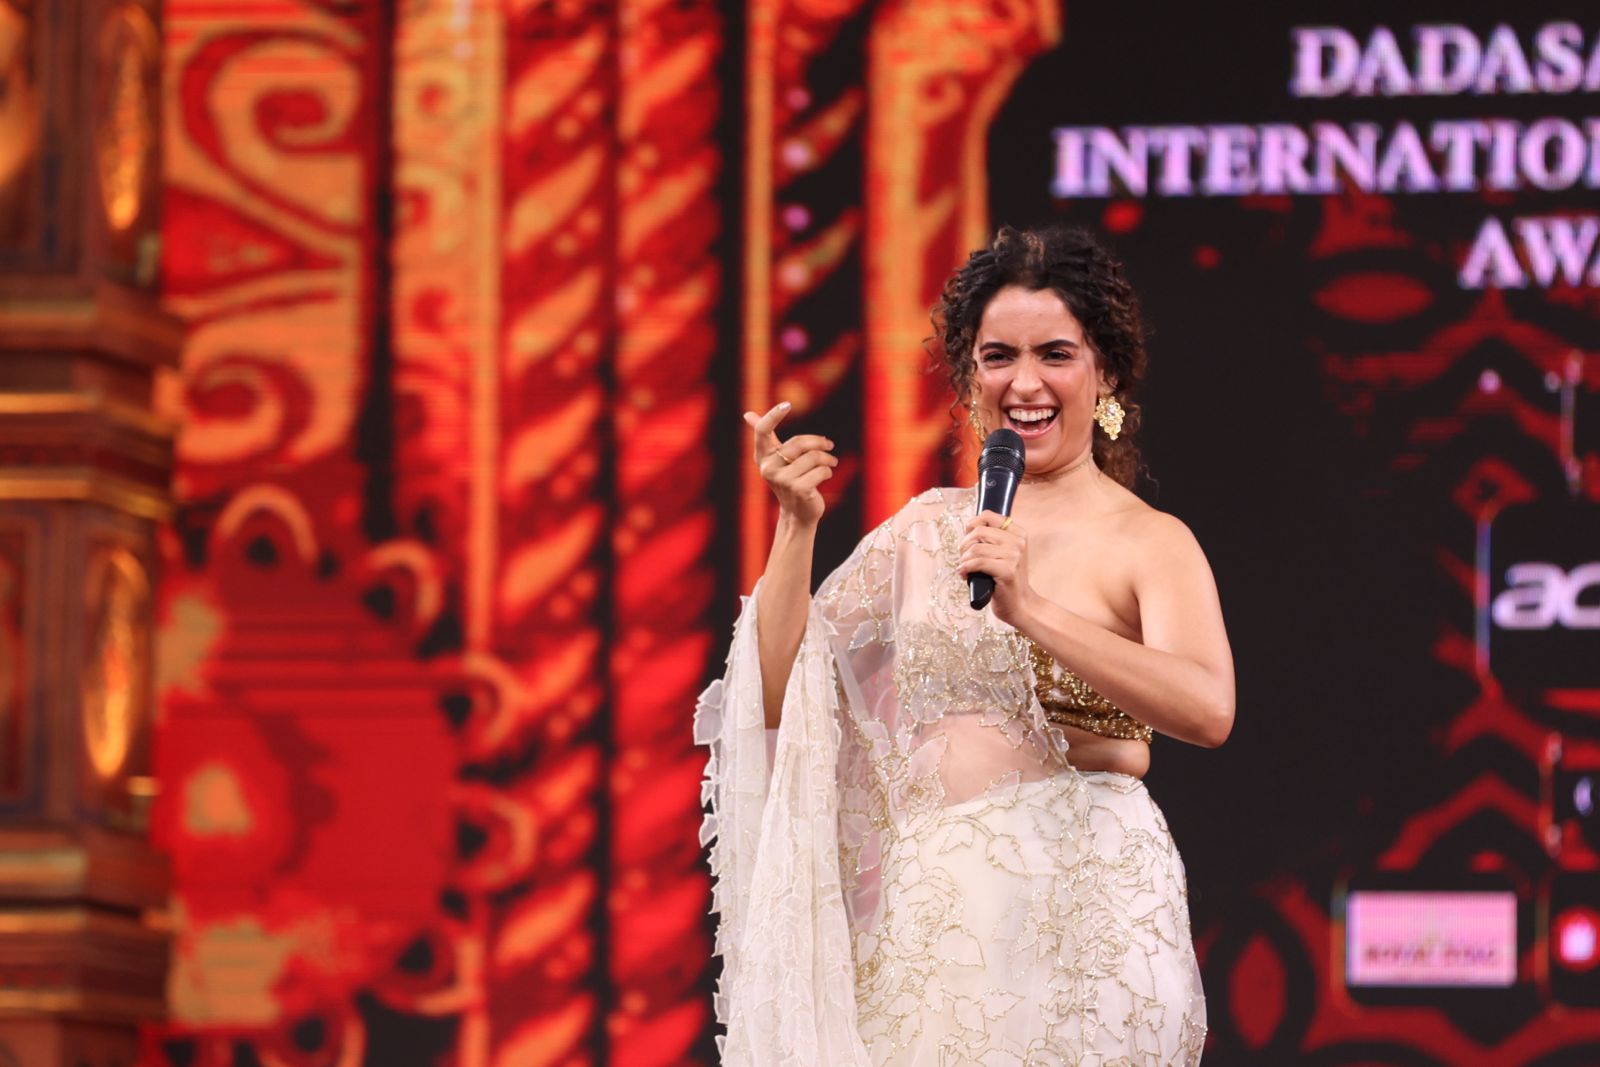 Sanya Malhotra received Dadasaheb Phalke Award for 'Best Actress in a Comic Role' for 'Kathal'